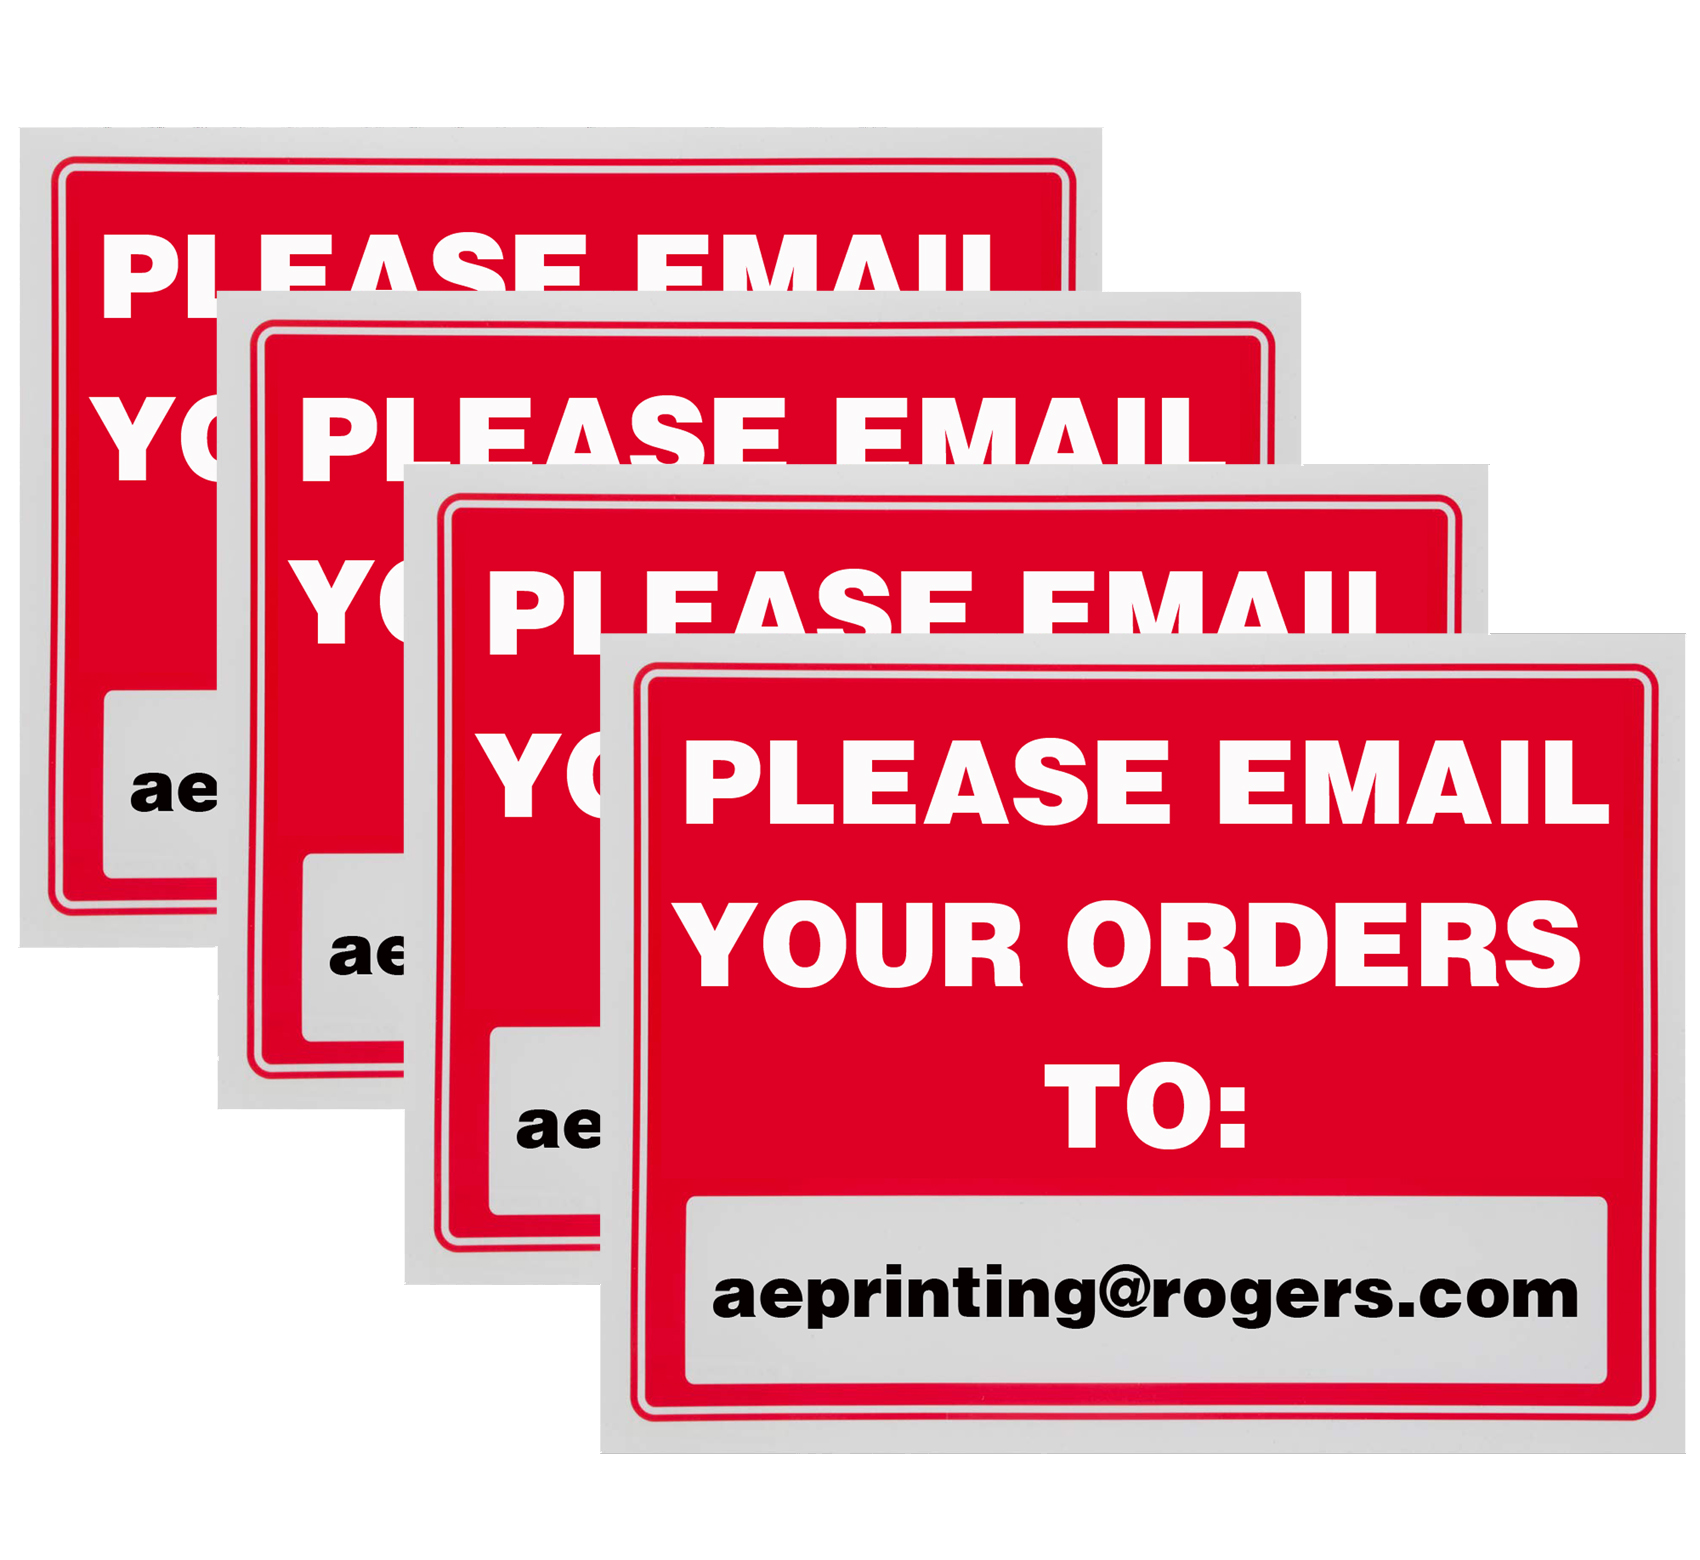 Email to send order to: AEPrinting@Rogers.com